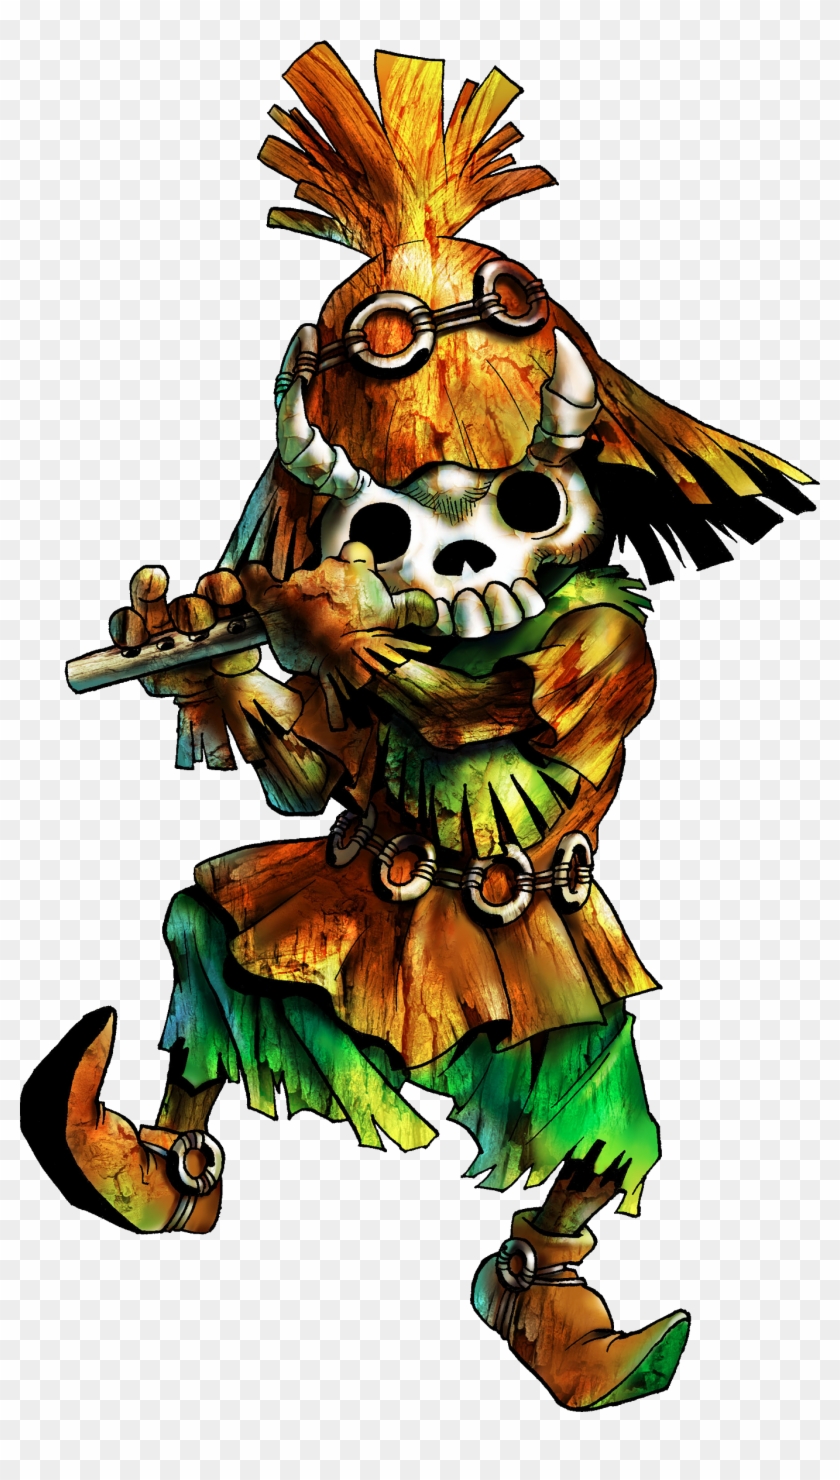 Artwork Of The Skull Kid From Ocarina Of Time, With - Artwork Of The Skull Kid From Ocarina Of Time, With #556378